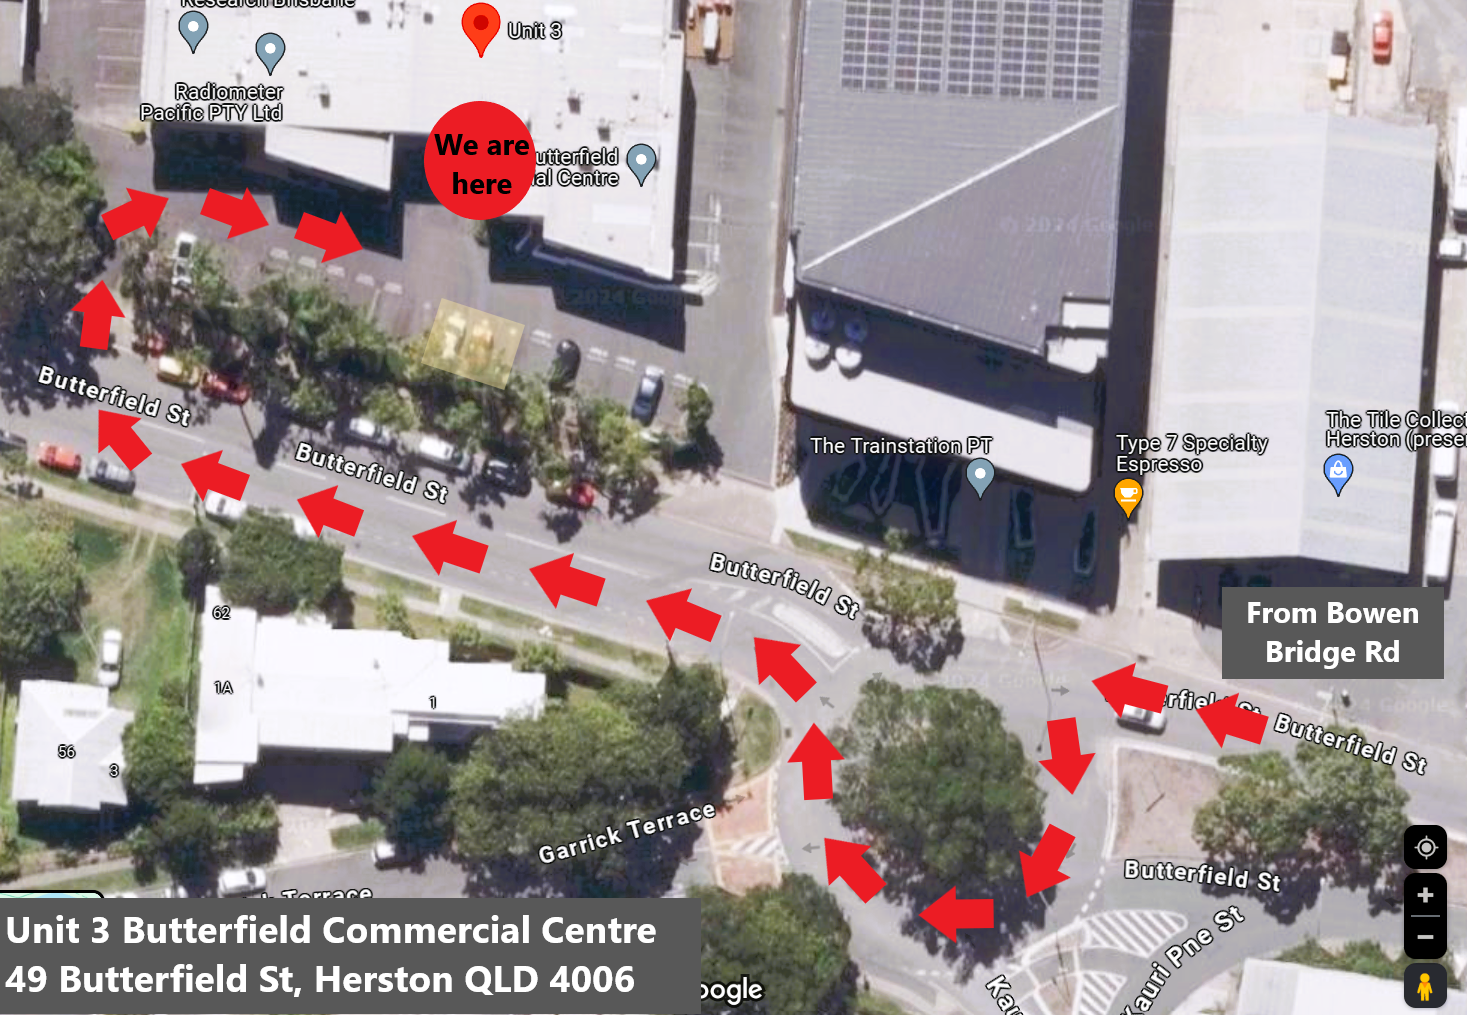 Map view of Butterfield st showing entrance via 2nd driveway into Butterfield Commercial Centre